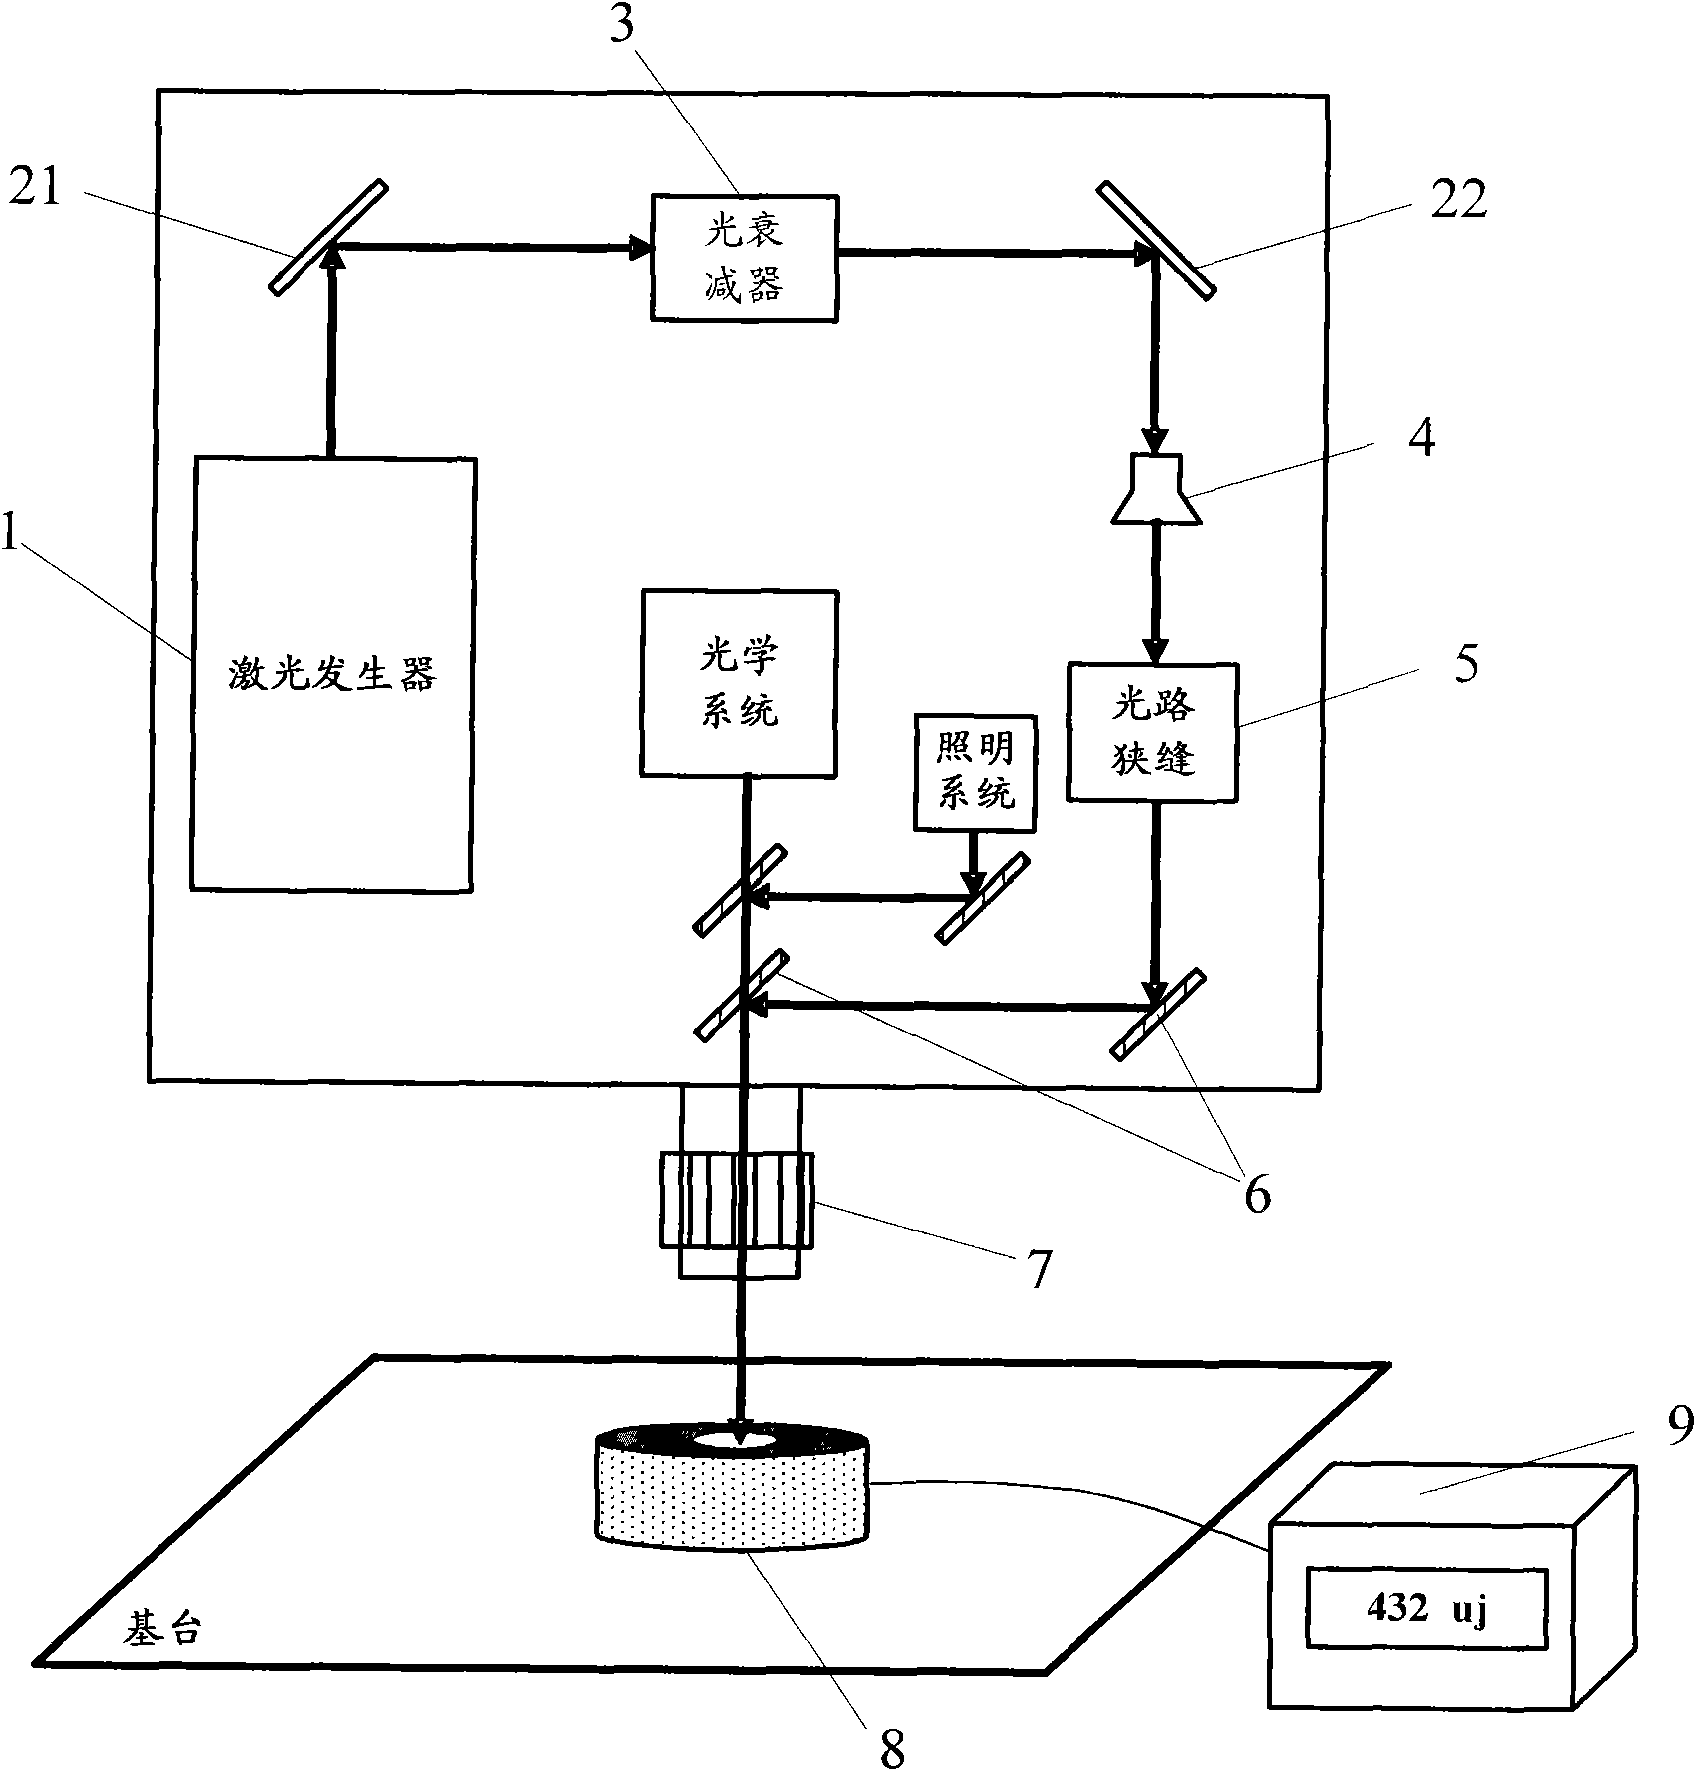 Array substrate maintenance equipment and method